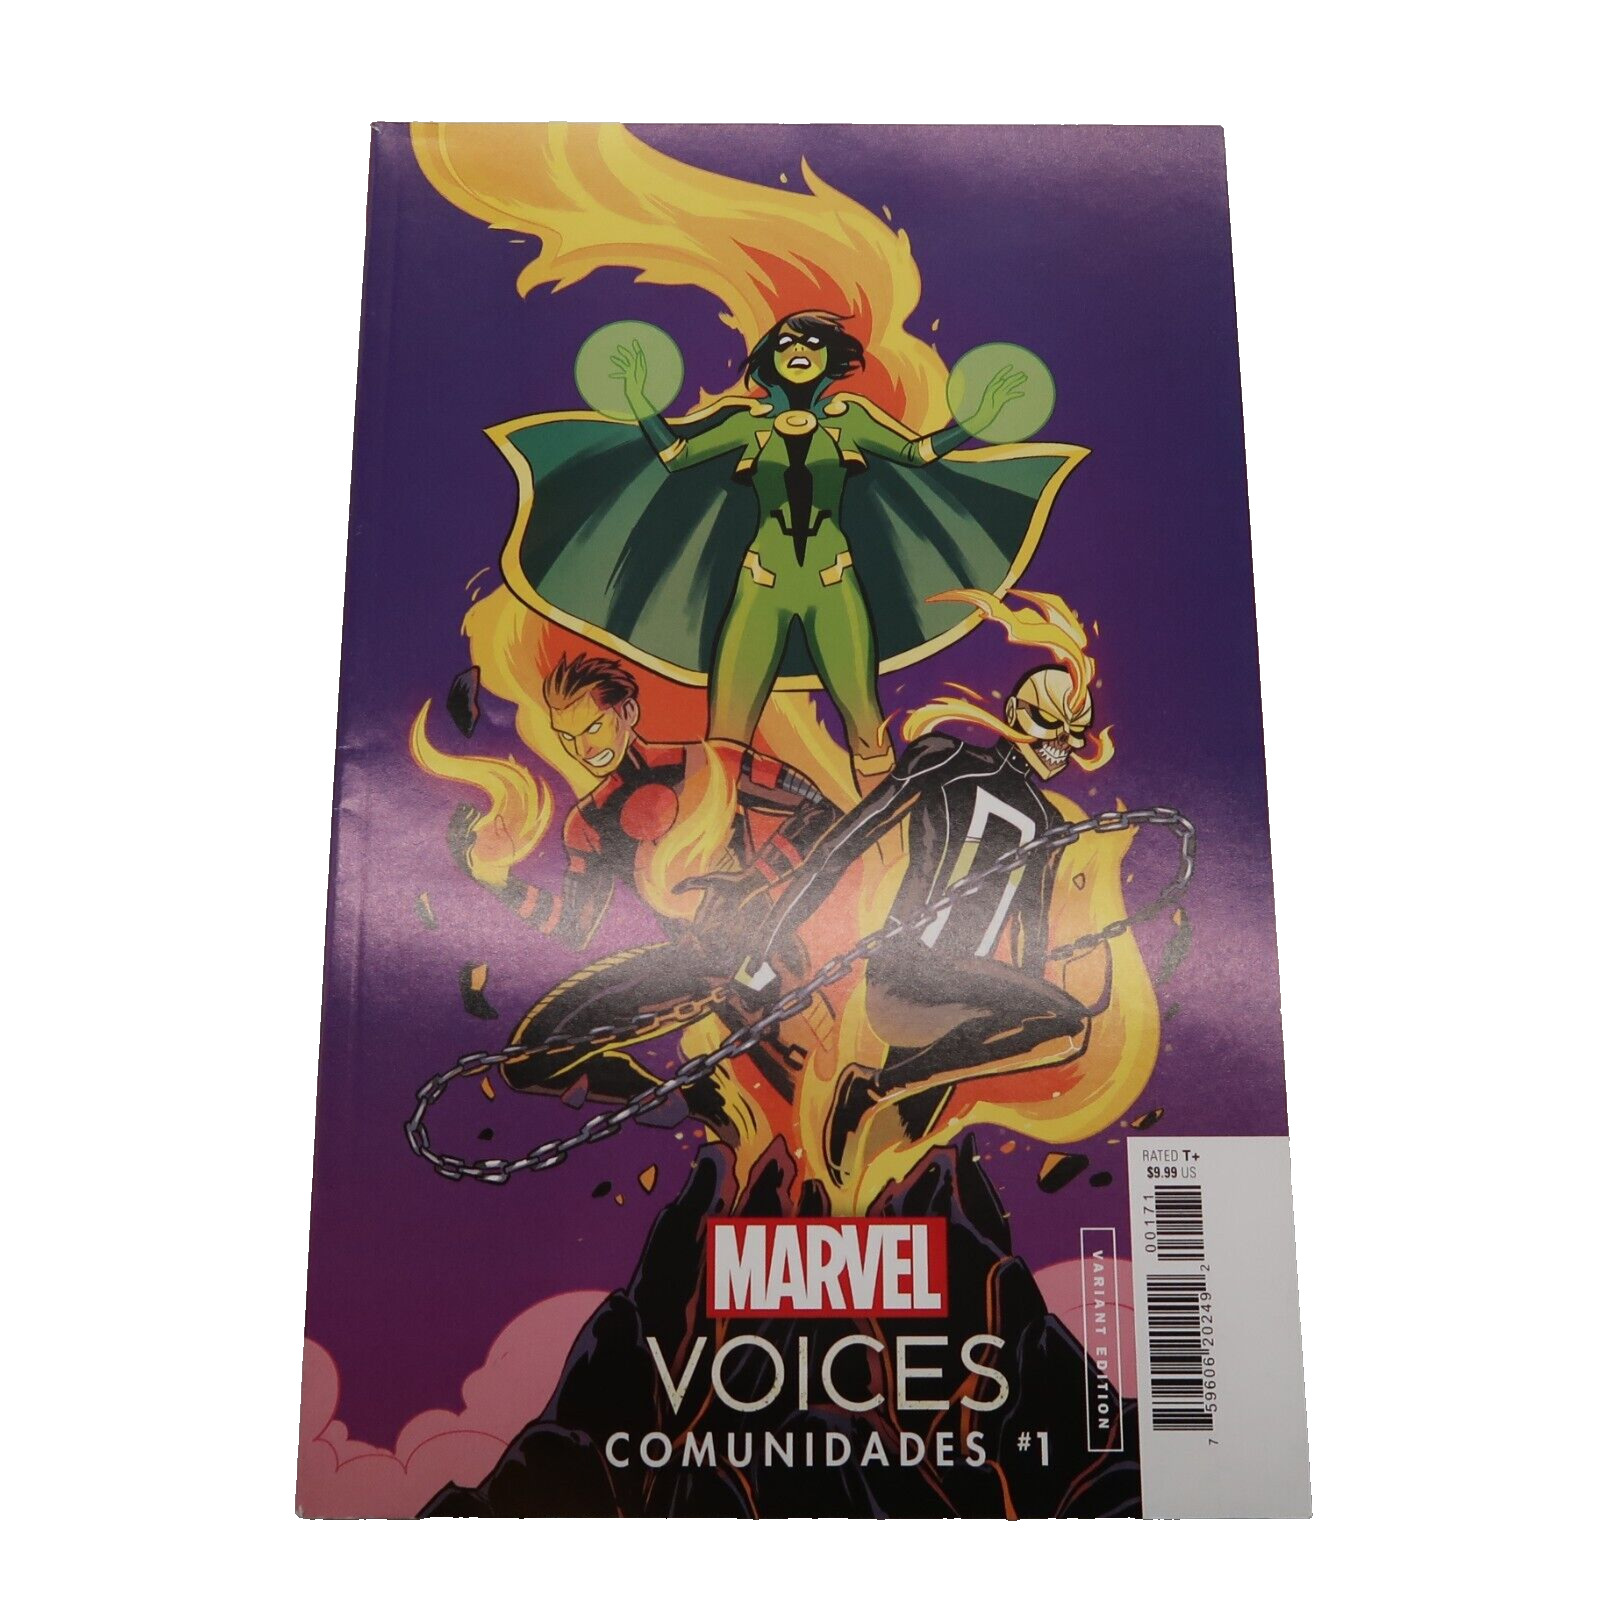 Marvel Comics Voices Community Comunidades Issue #1 Variant Cover